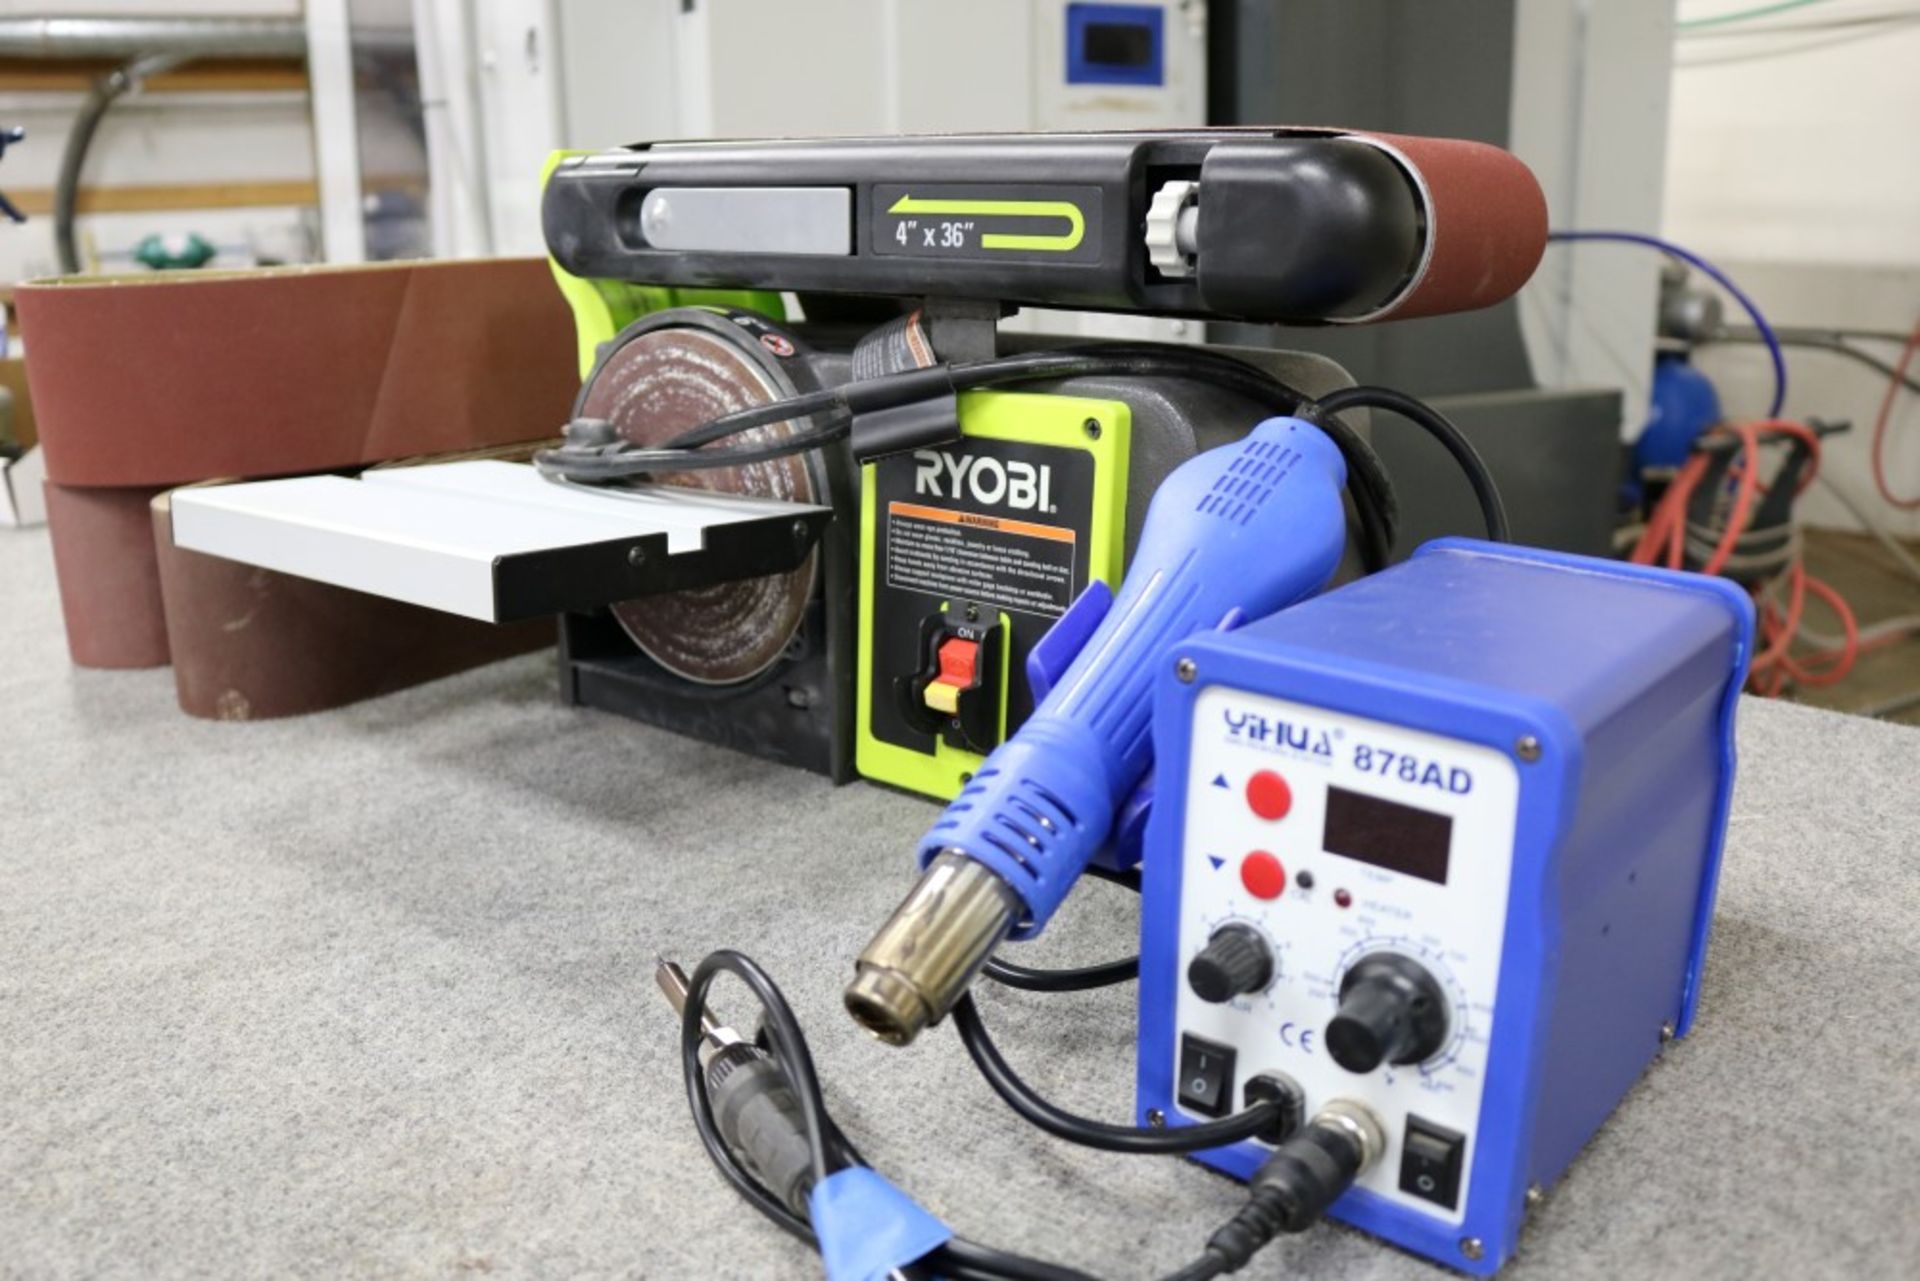 Ryobi 4" x 6" Belt and Disc Sander with Extra New Sanding Belts, also YiHua 878 AD- SMD ReWork - Image 5 of 9